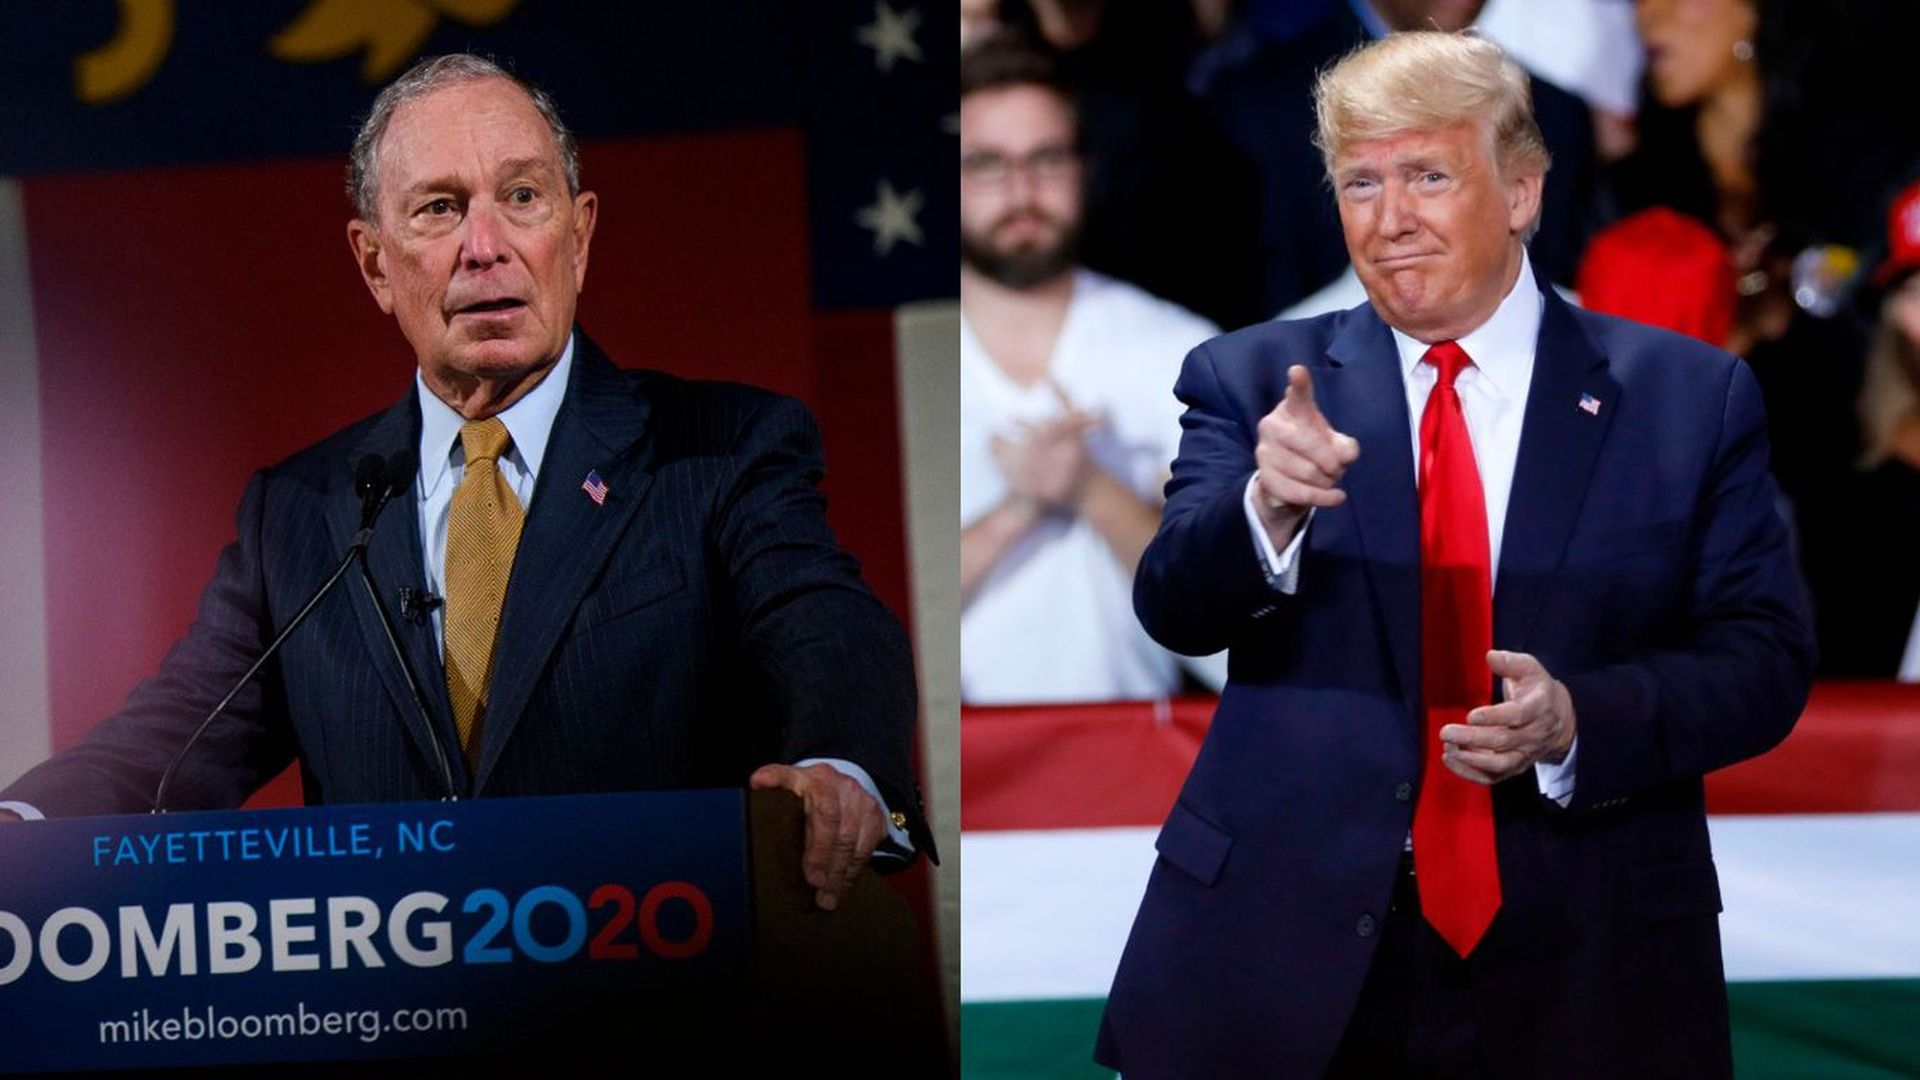 Michael Bloomberg and Donald Trump